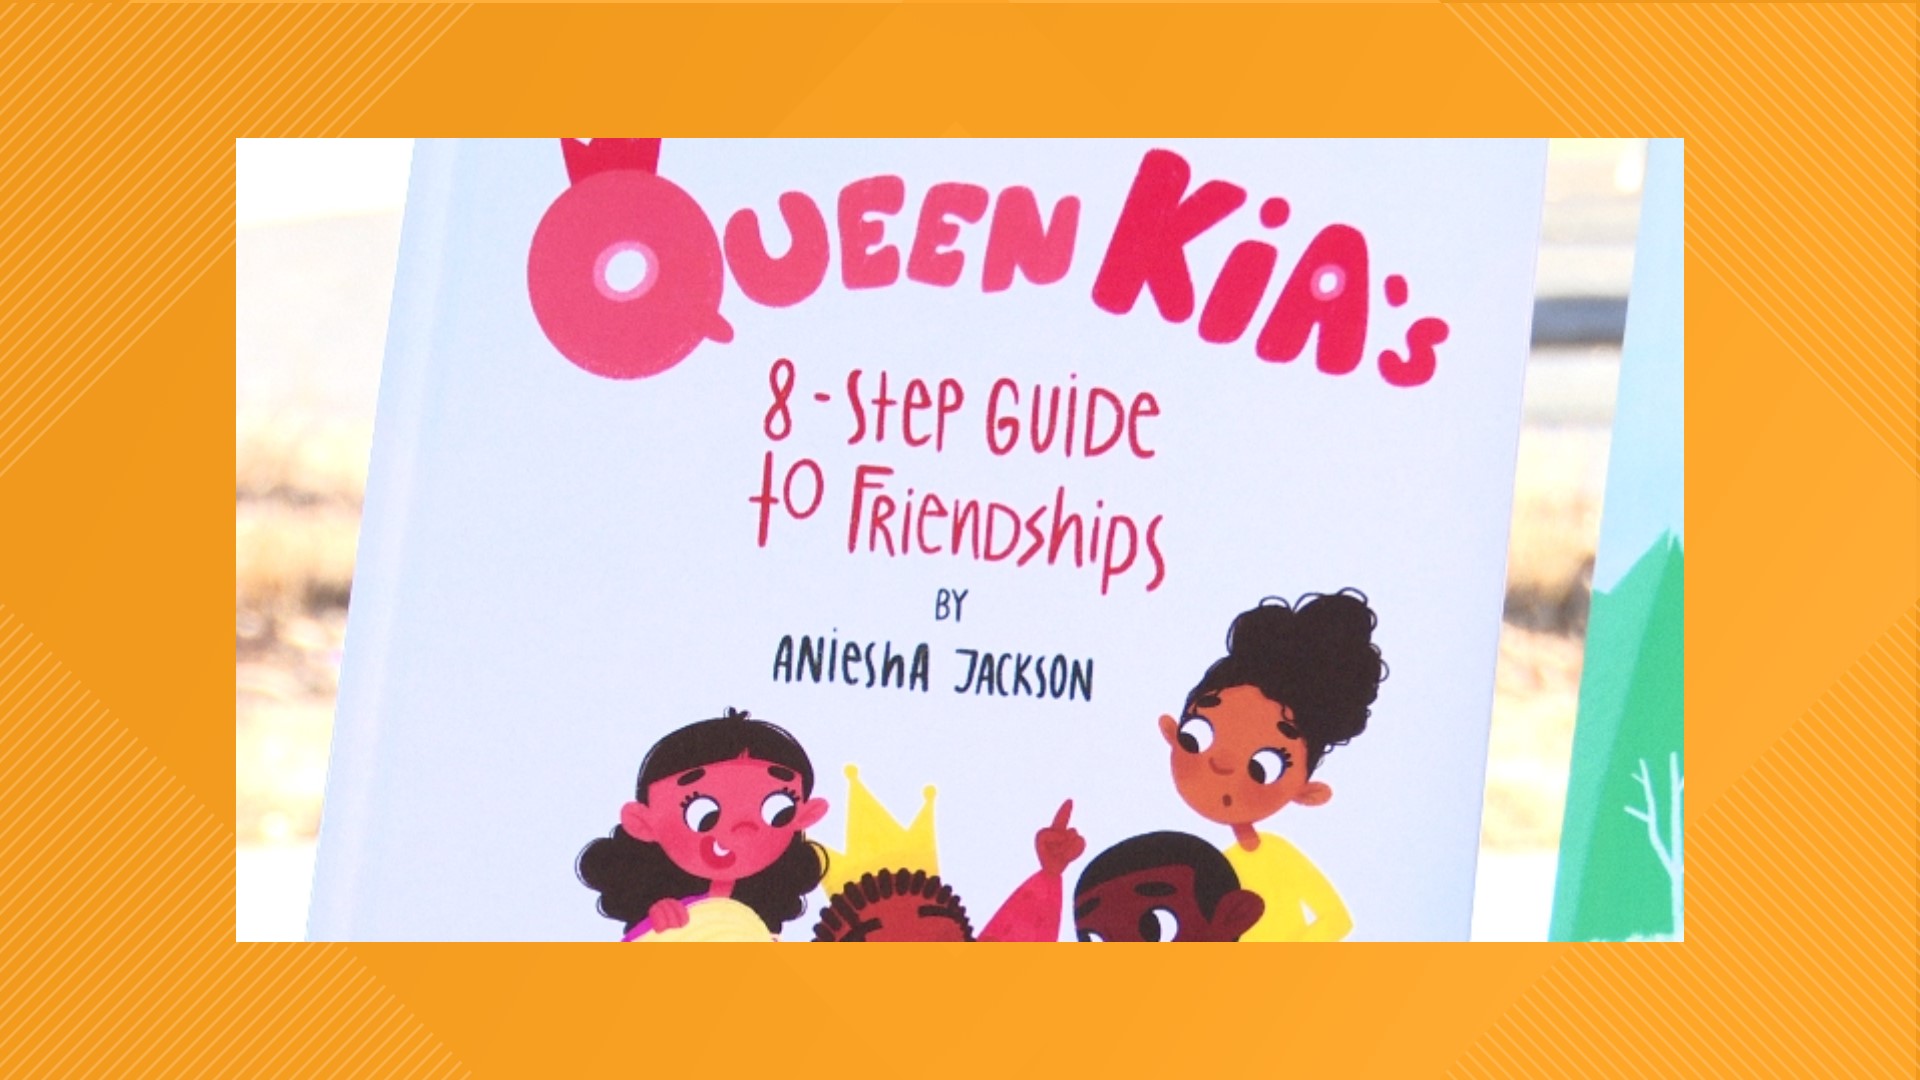 Aniesha Jackson has worked in education for more than 15 years, and now she is working to promote social and emotional learning for minority children in books.